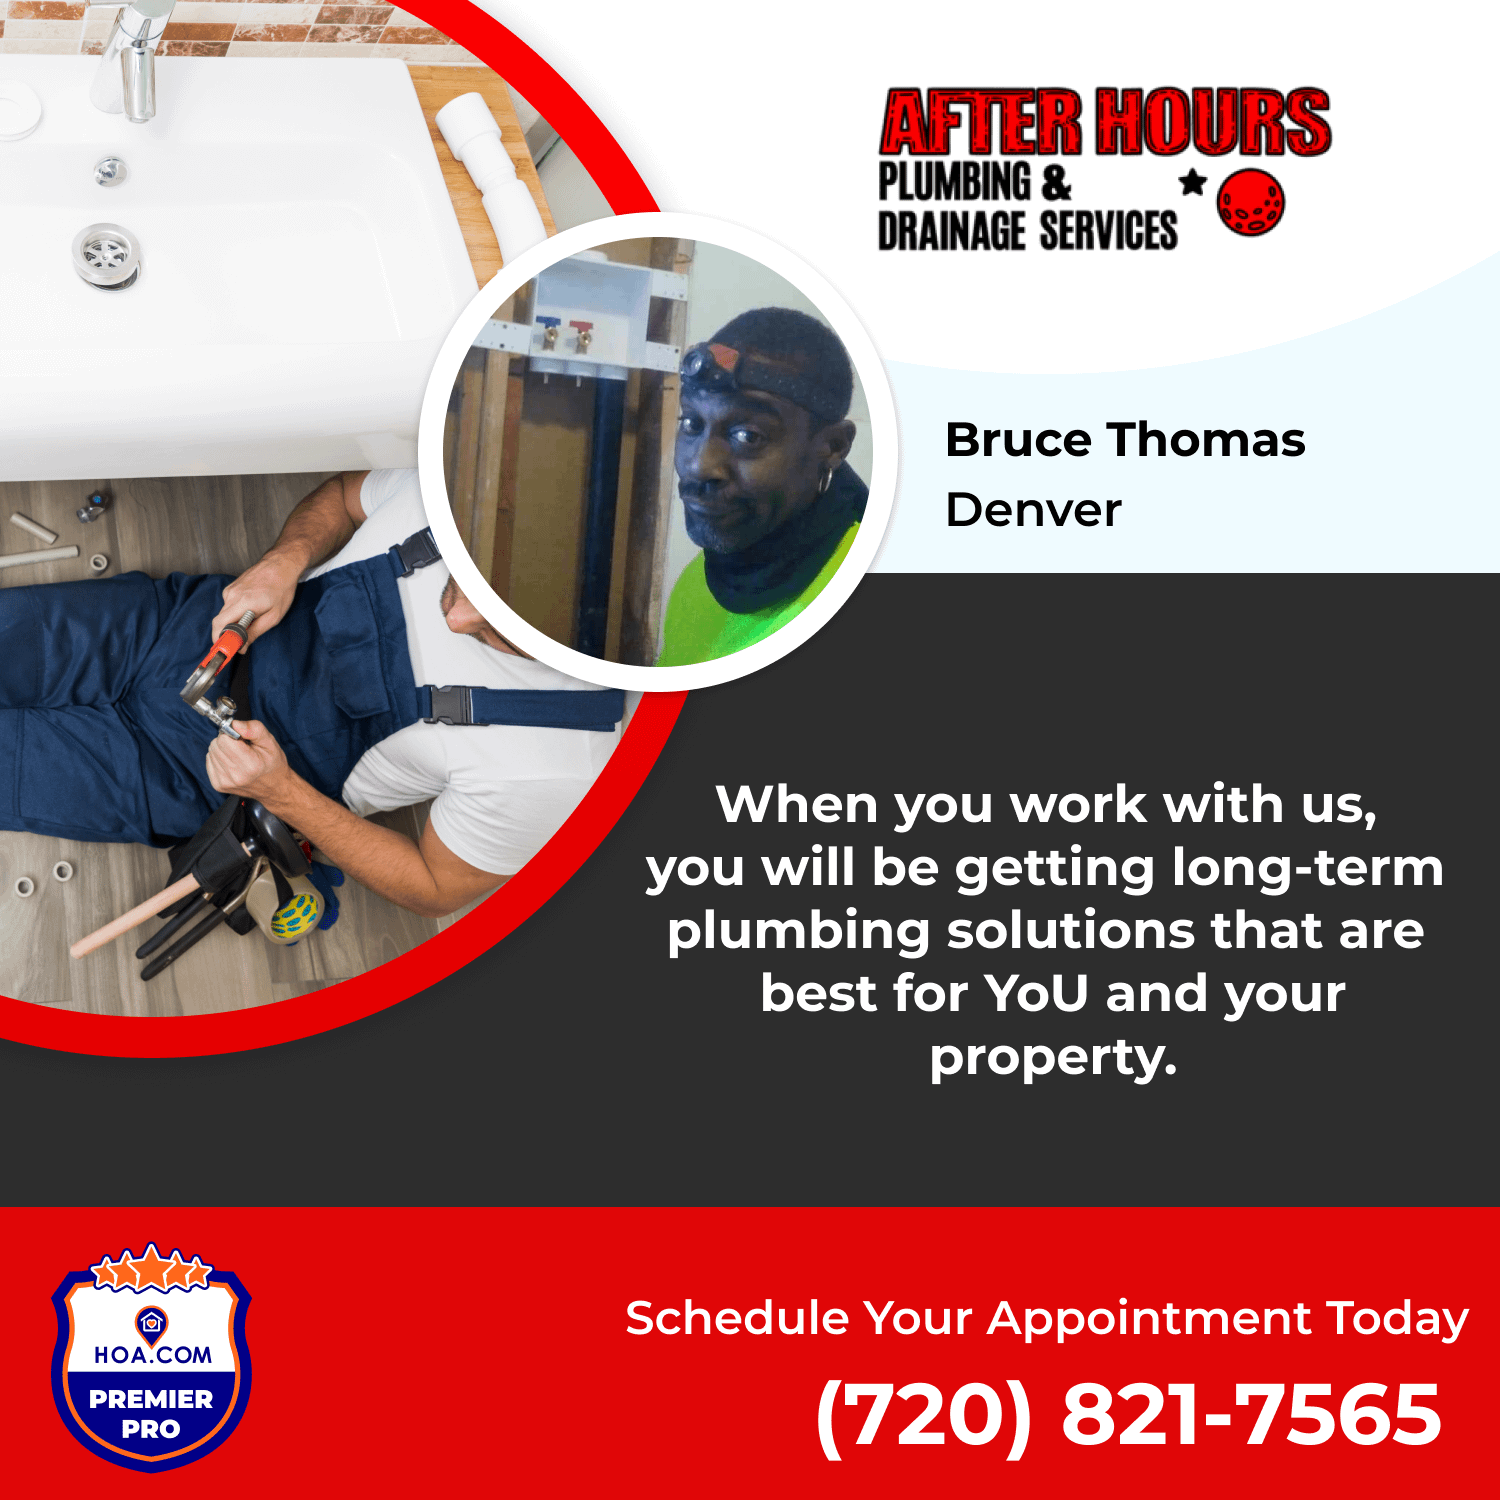 Premier Pro Bruce Thomas After Hours PLumbing & Drainage Services